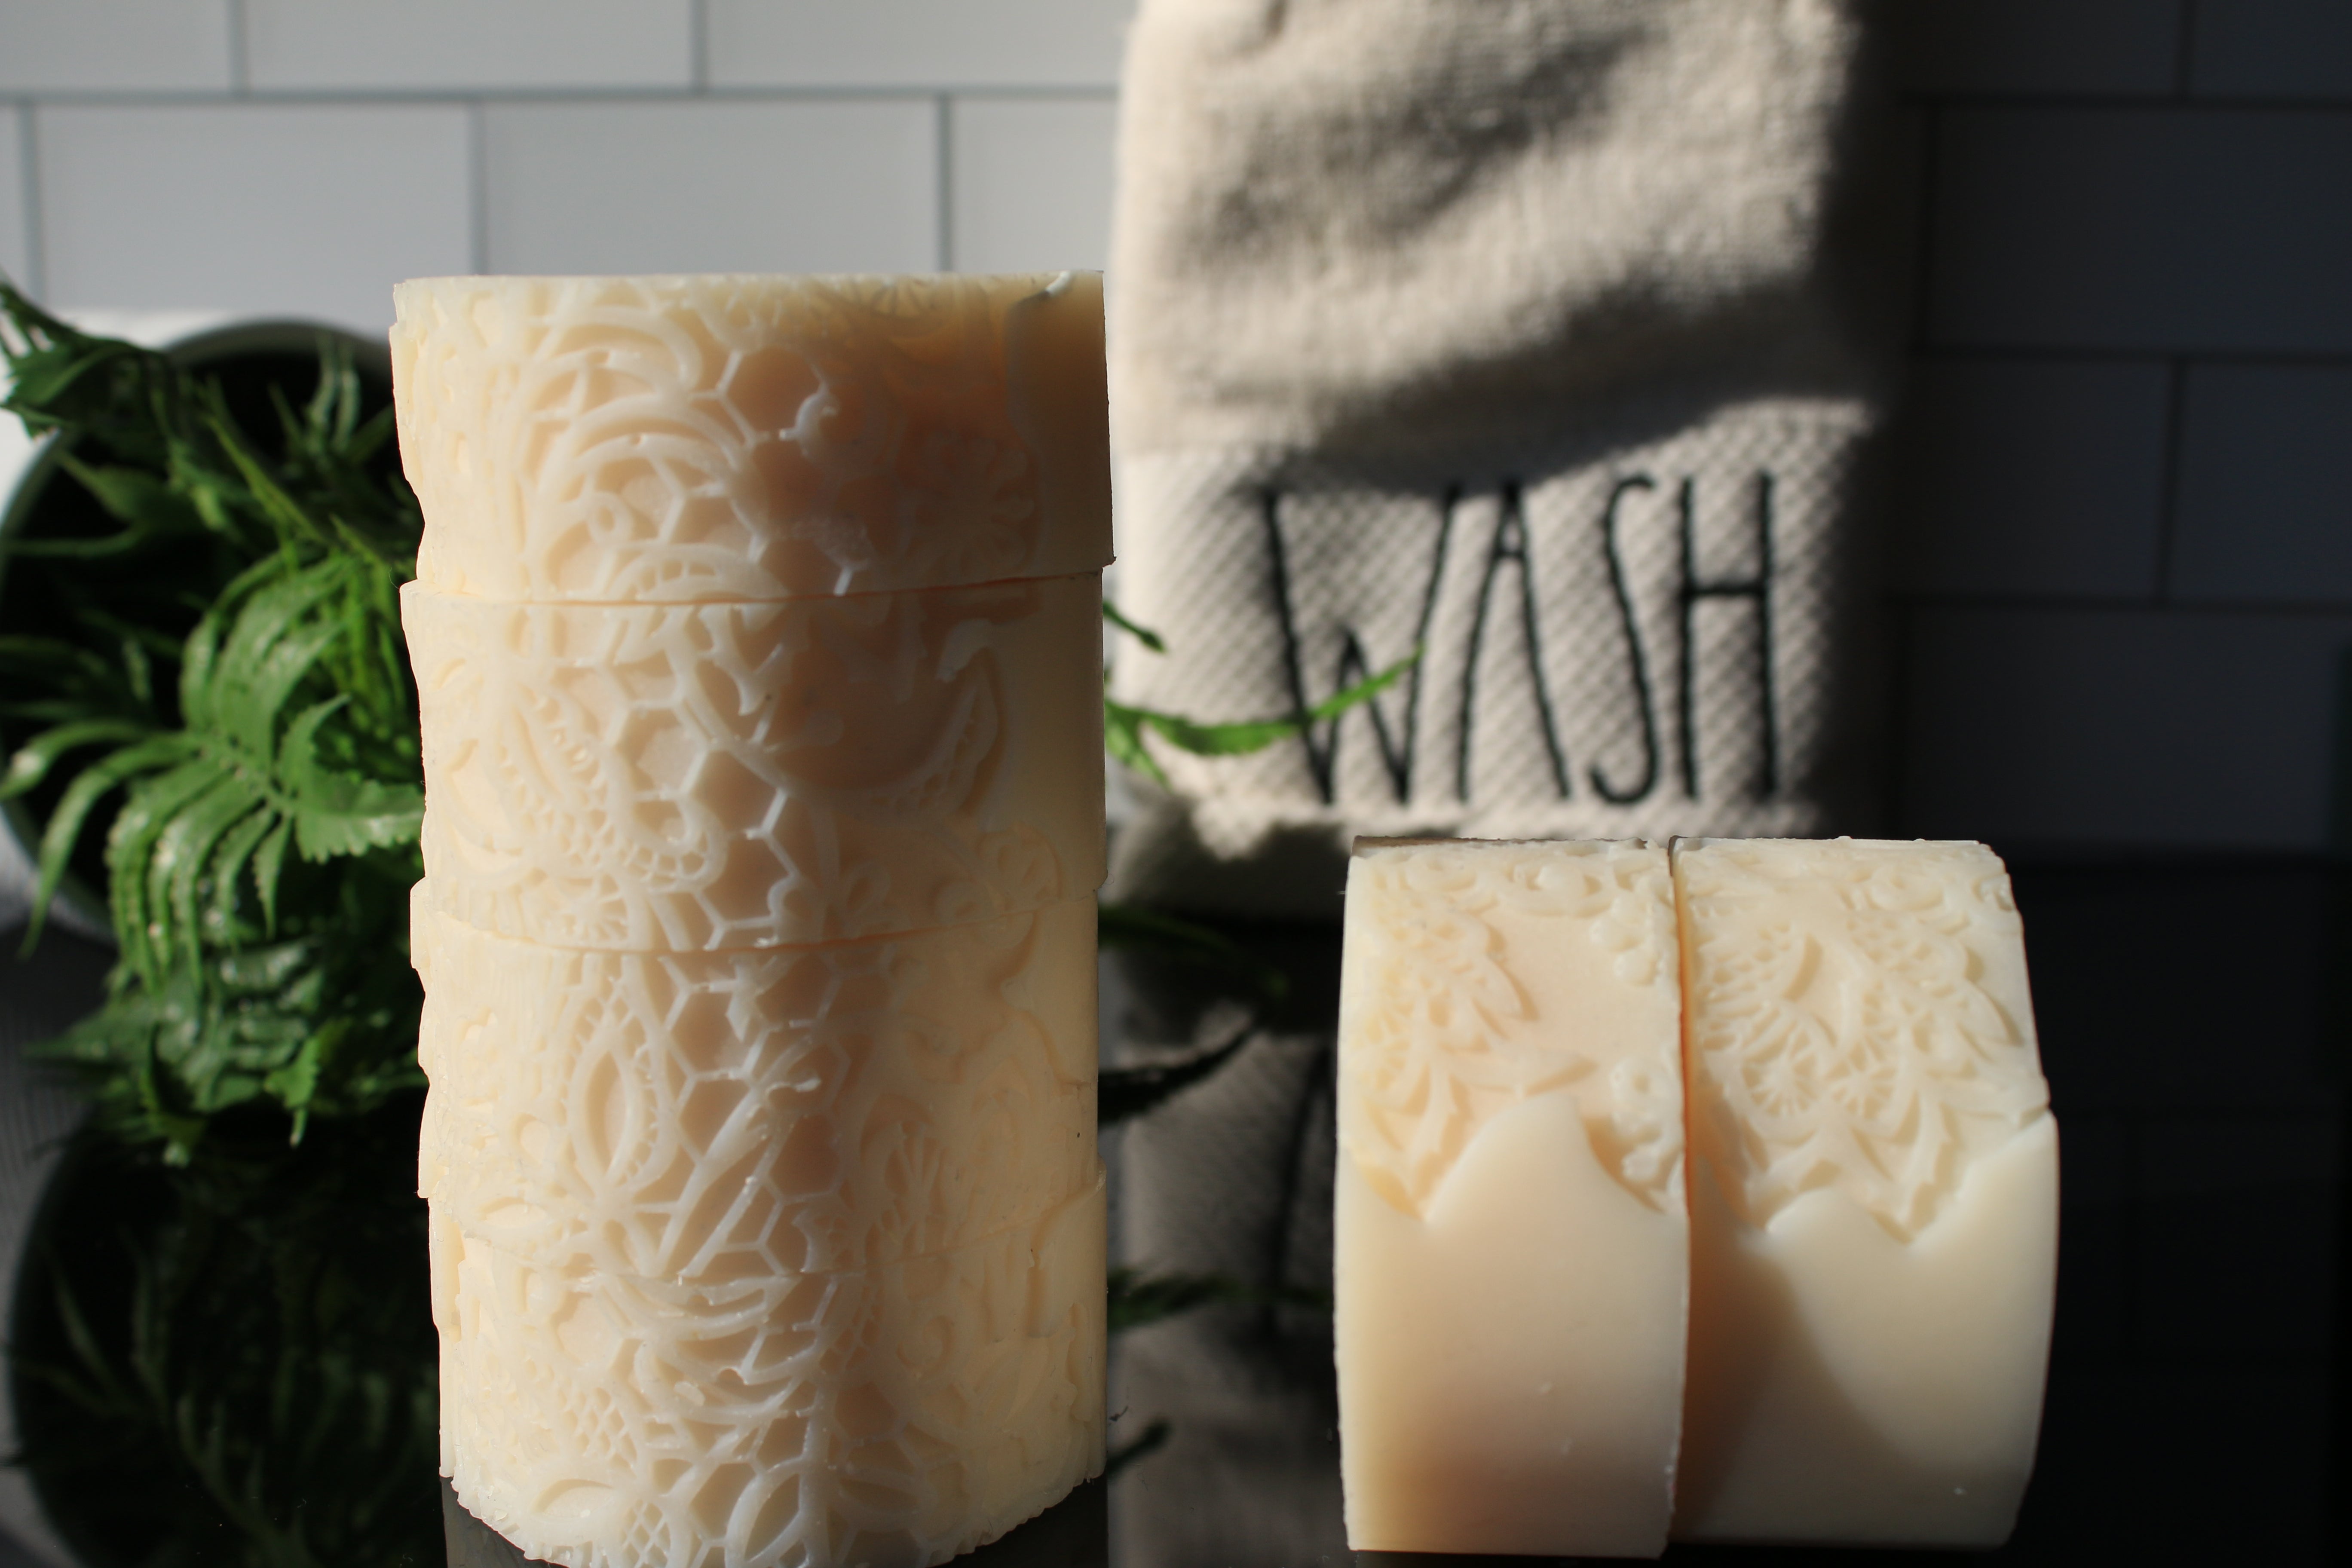 unscented lard soap made in Toronto